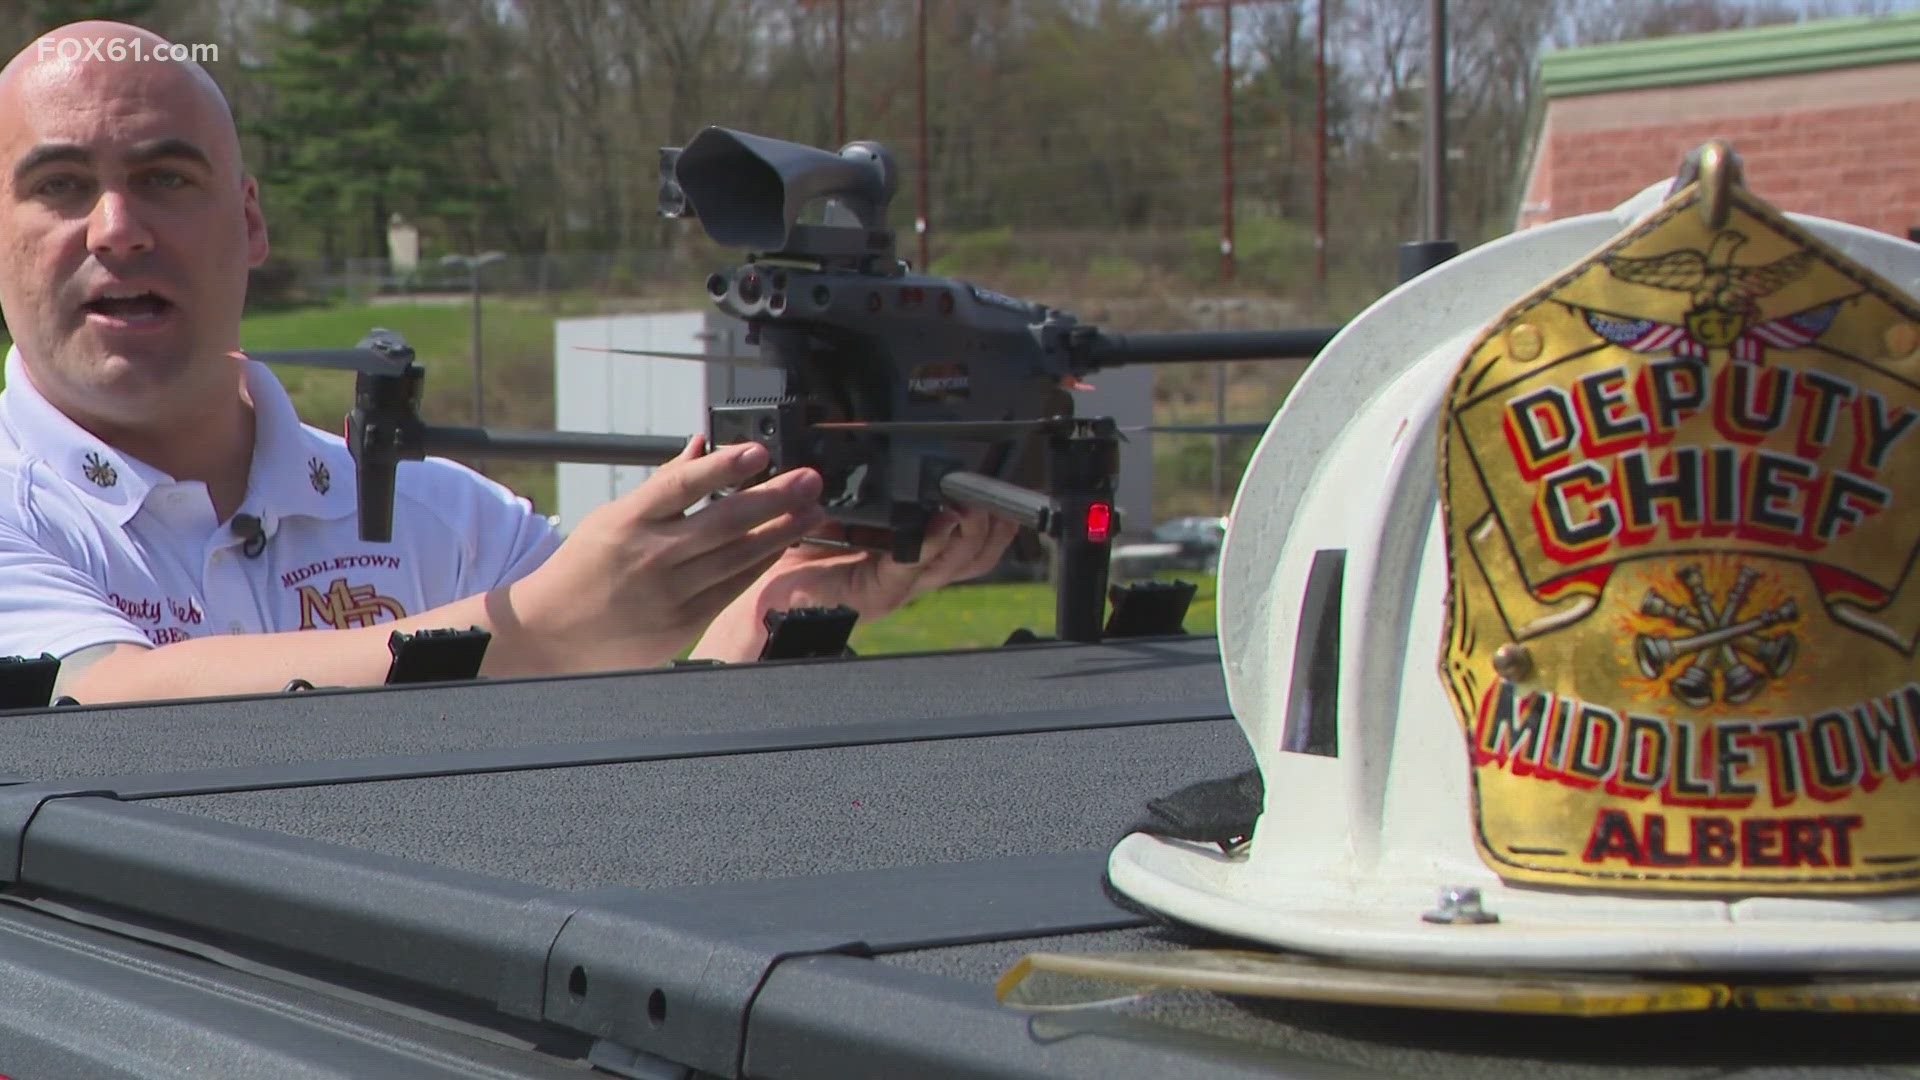 New “Aerial Support Team” flying drones are on-scene in Middletown.